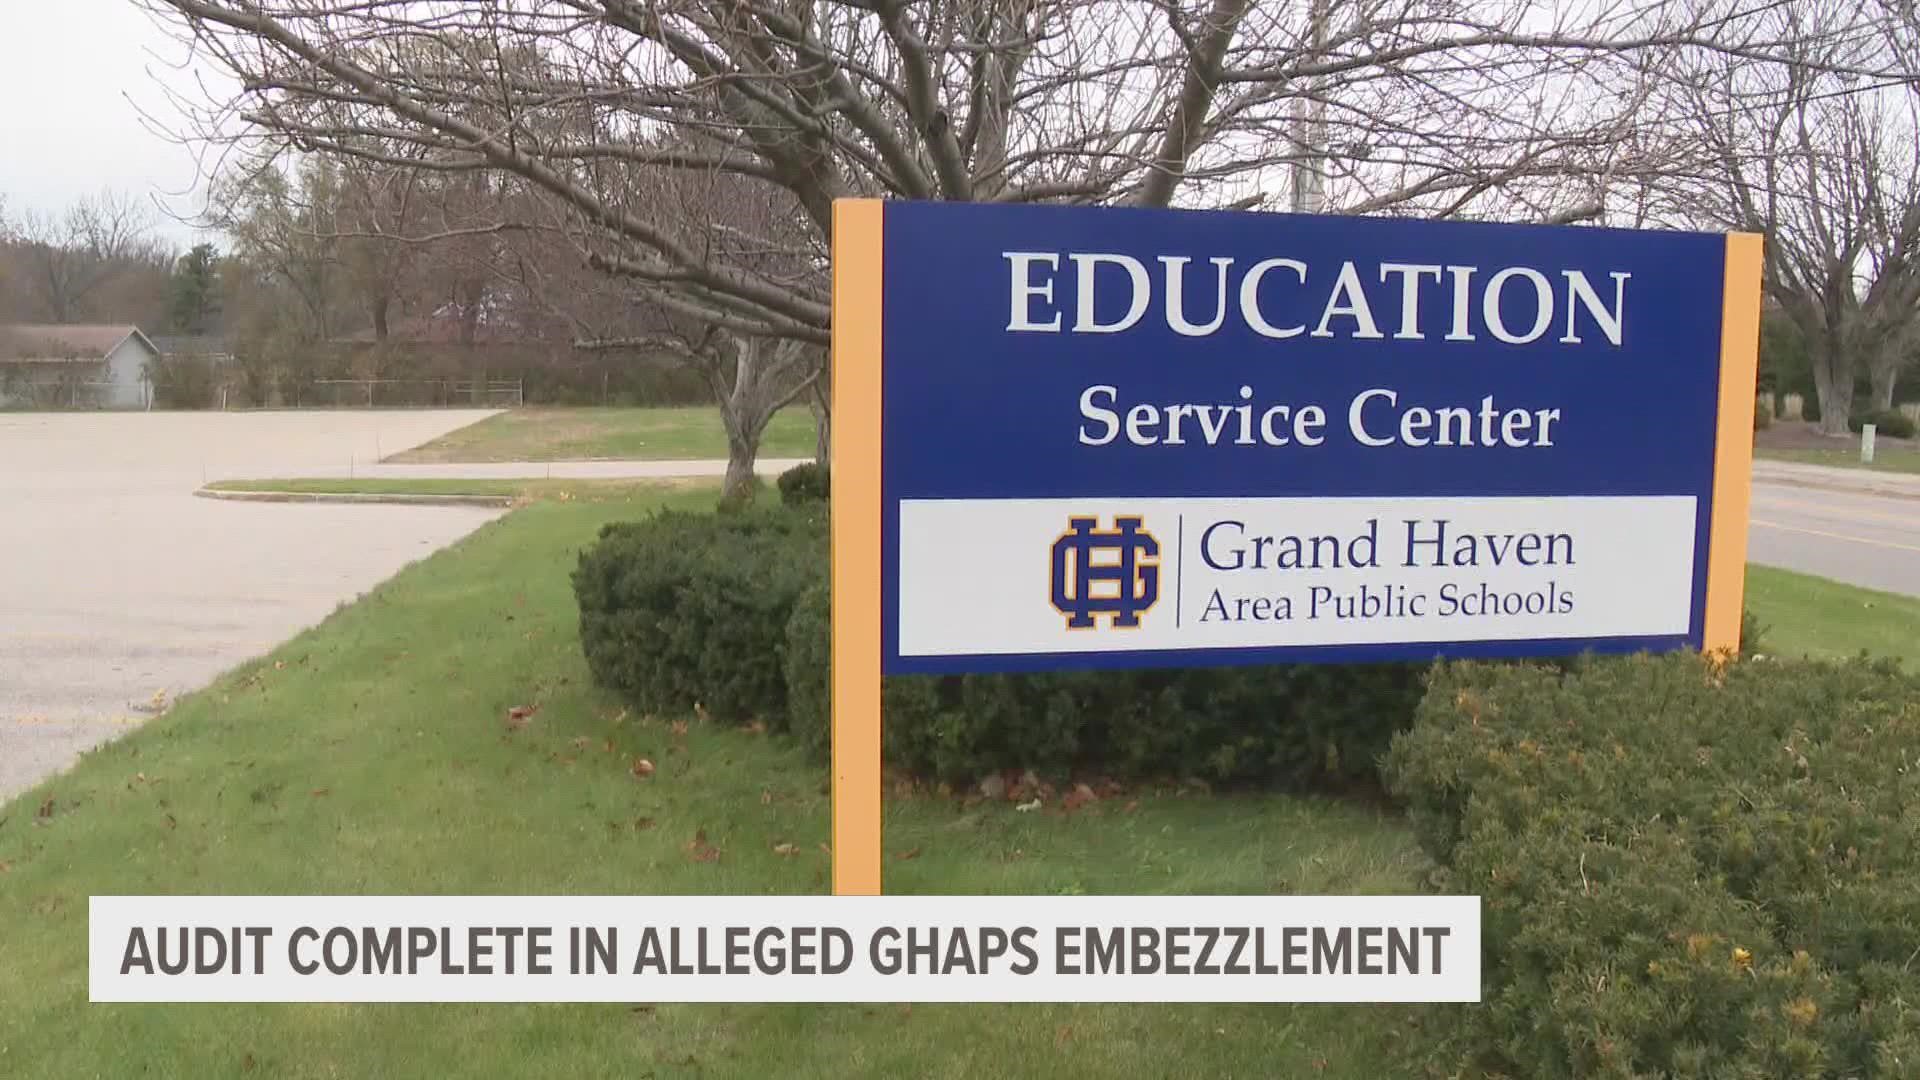 A forensic audit showed that the former assistant superintendent of Grand Haven Area Public Schools acted alone in the embezzlement.